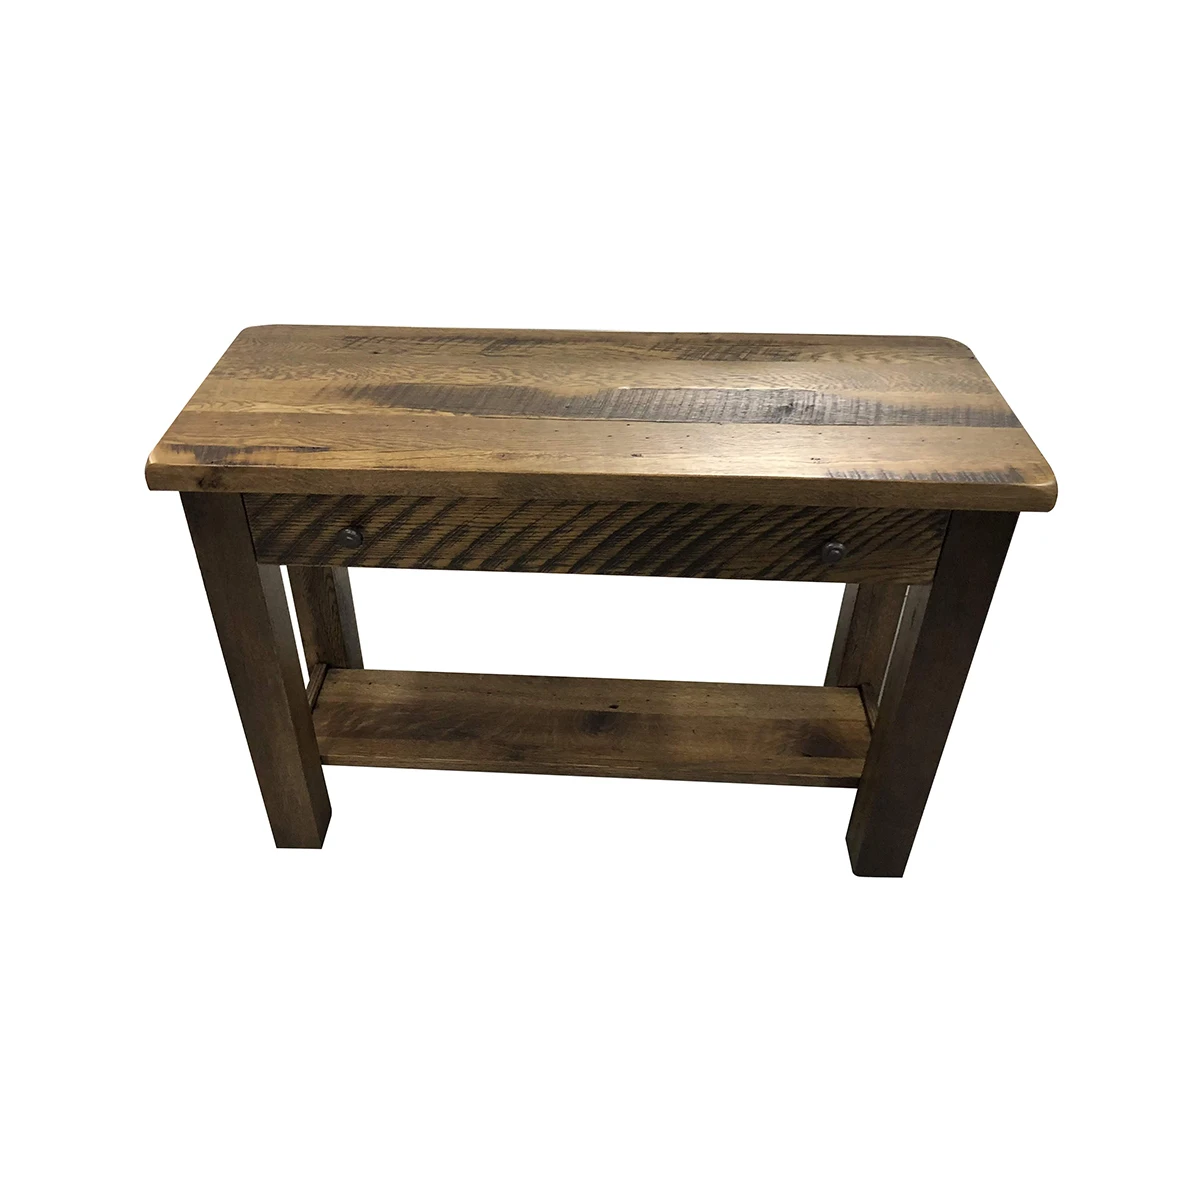 Rustic Reclaimed Wood Sofa Table in Murky Finish